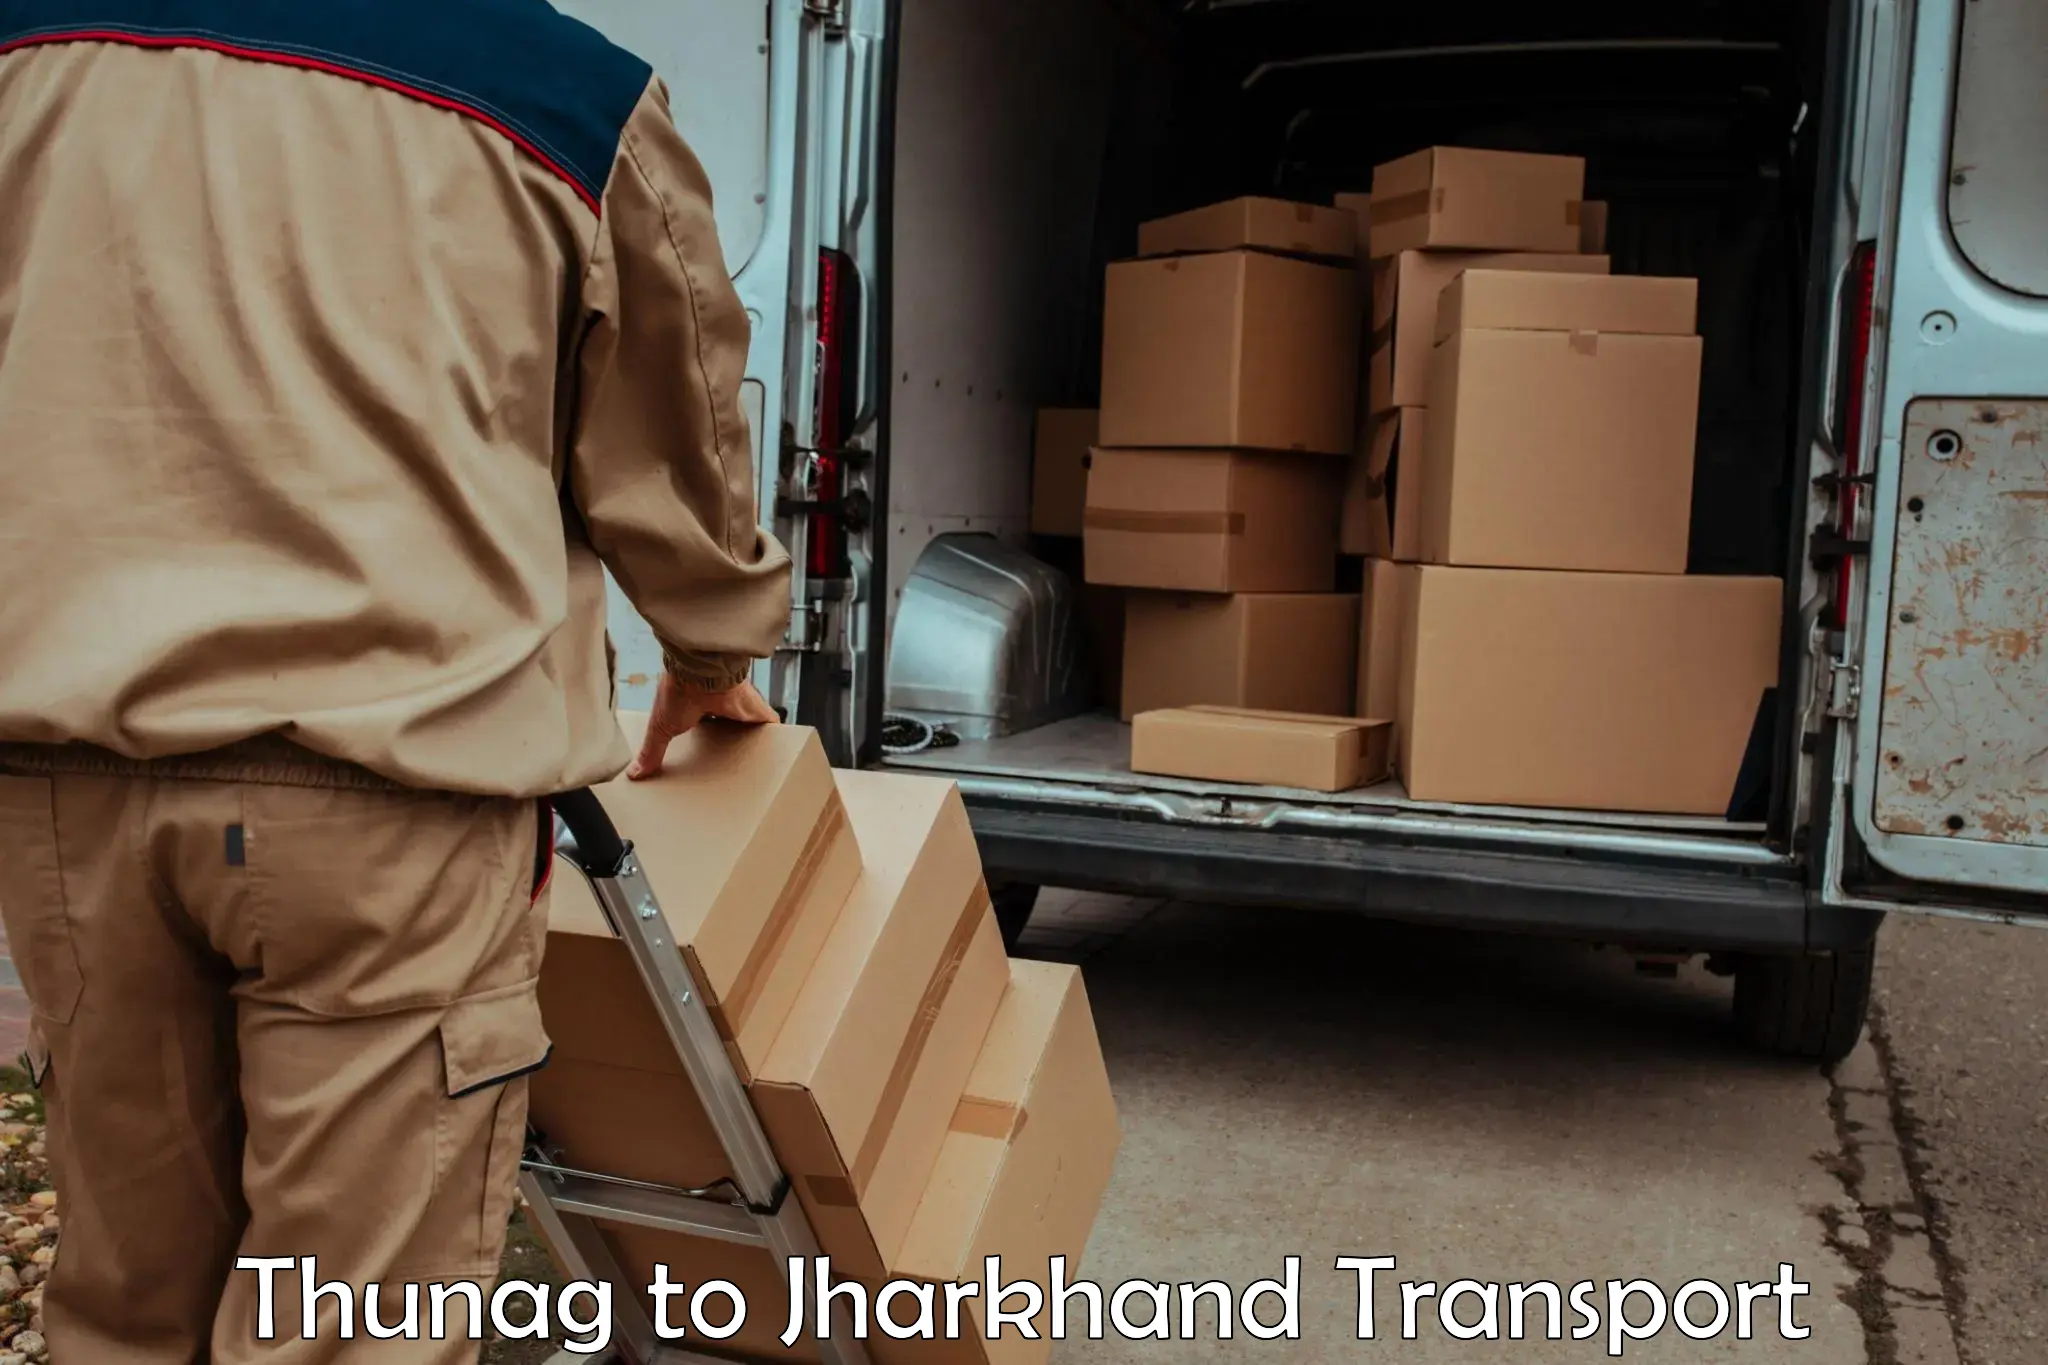 Truck transport companies in India Thunag to Domchanch